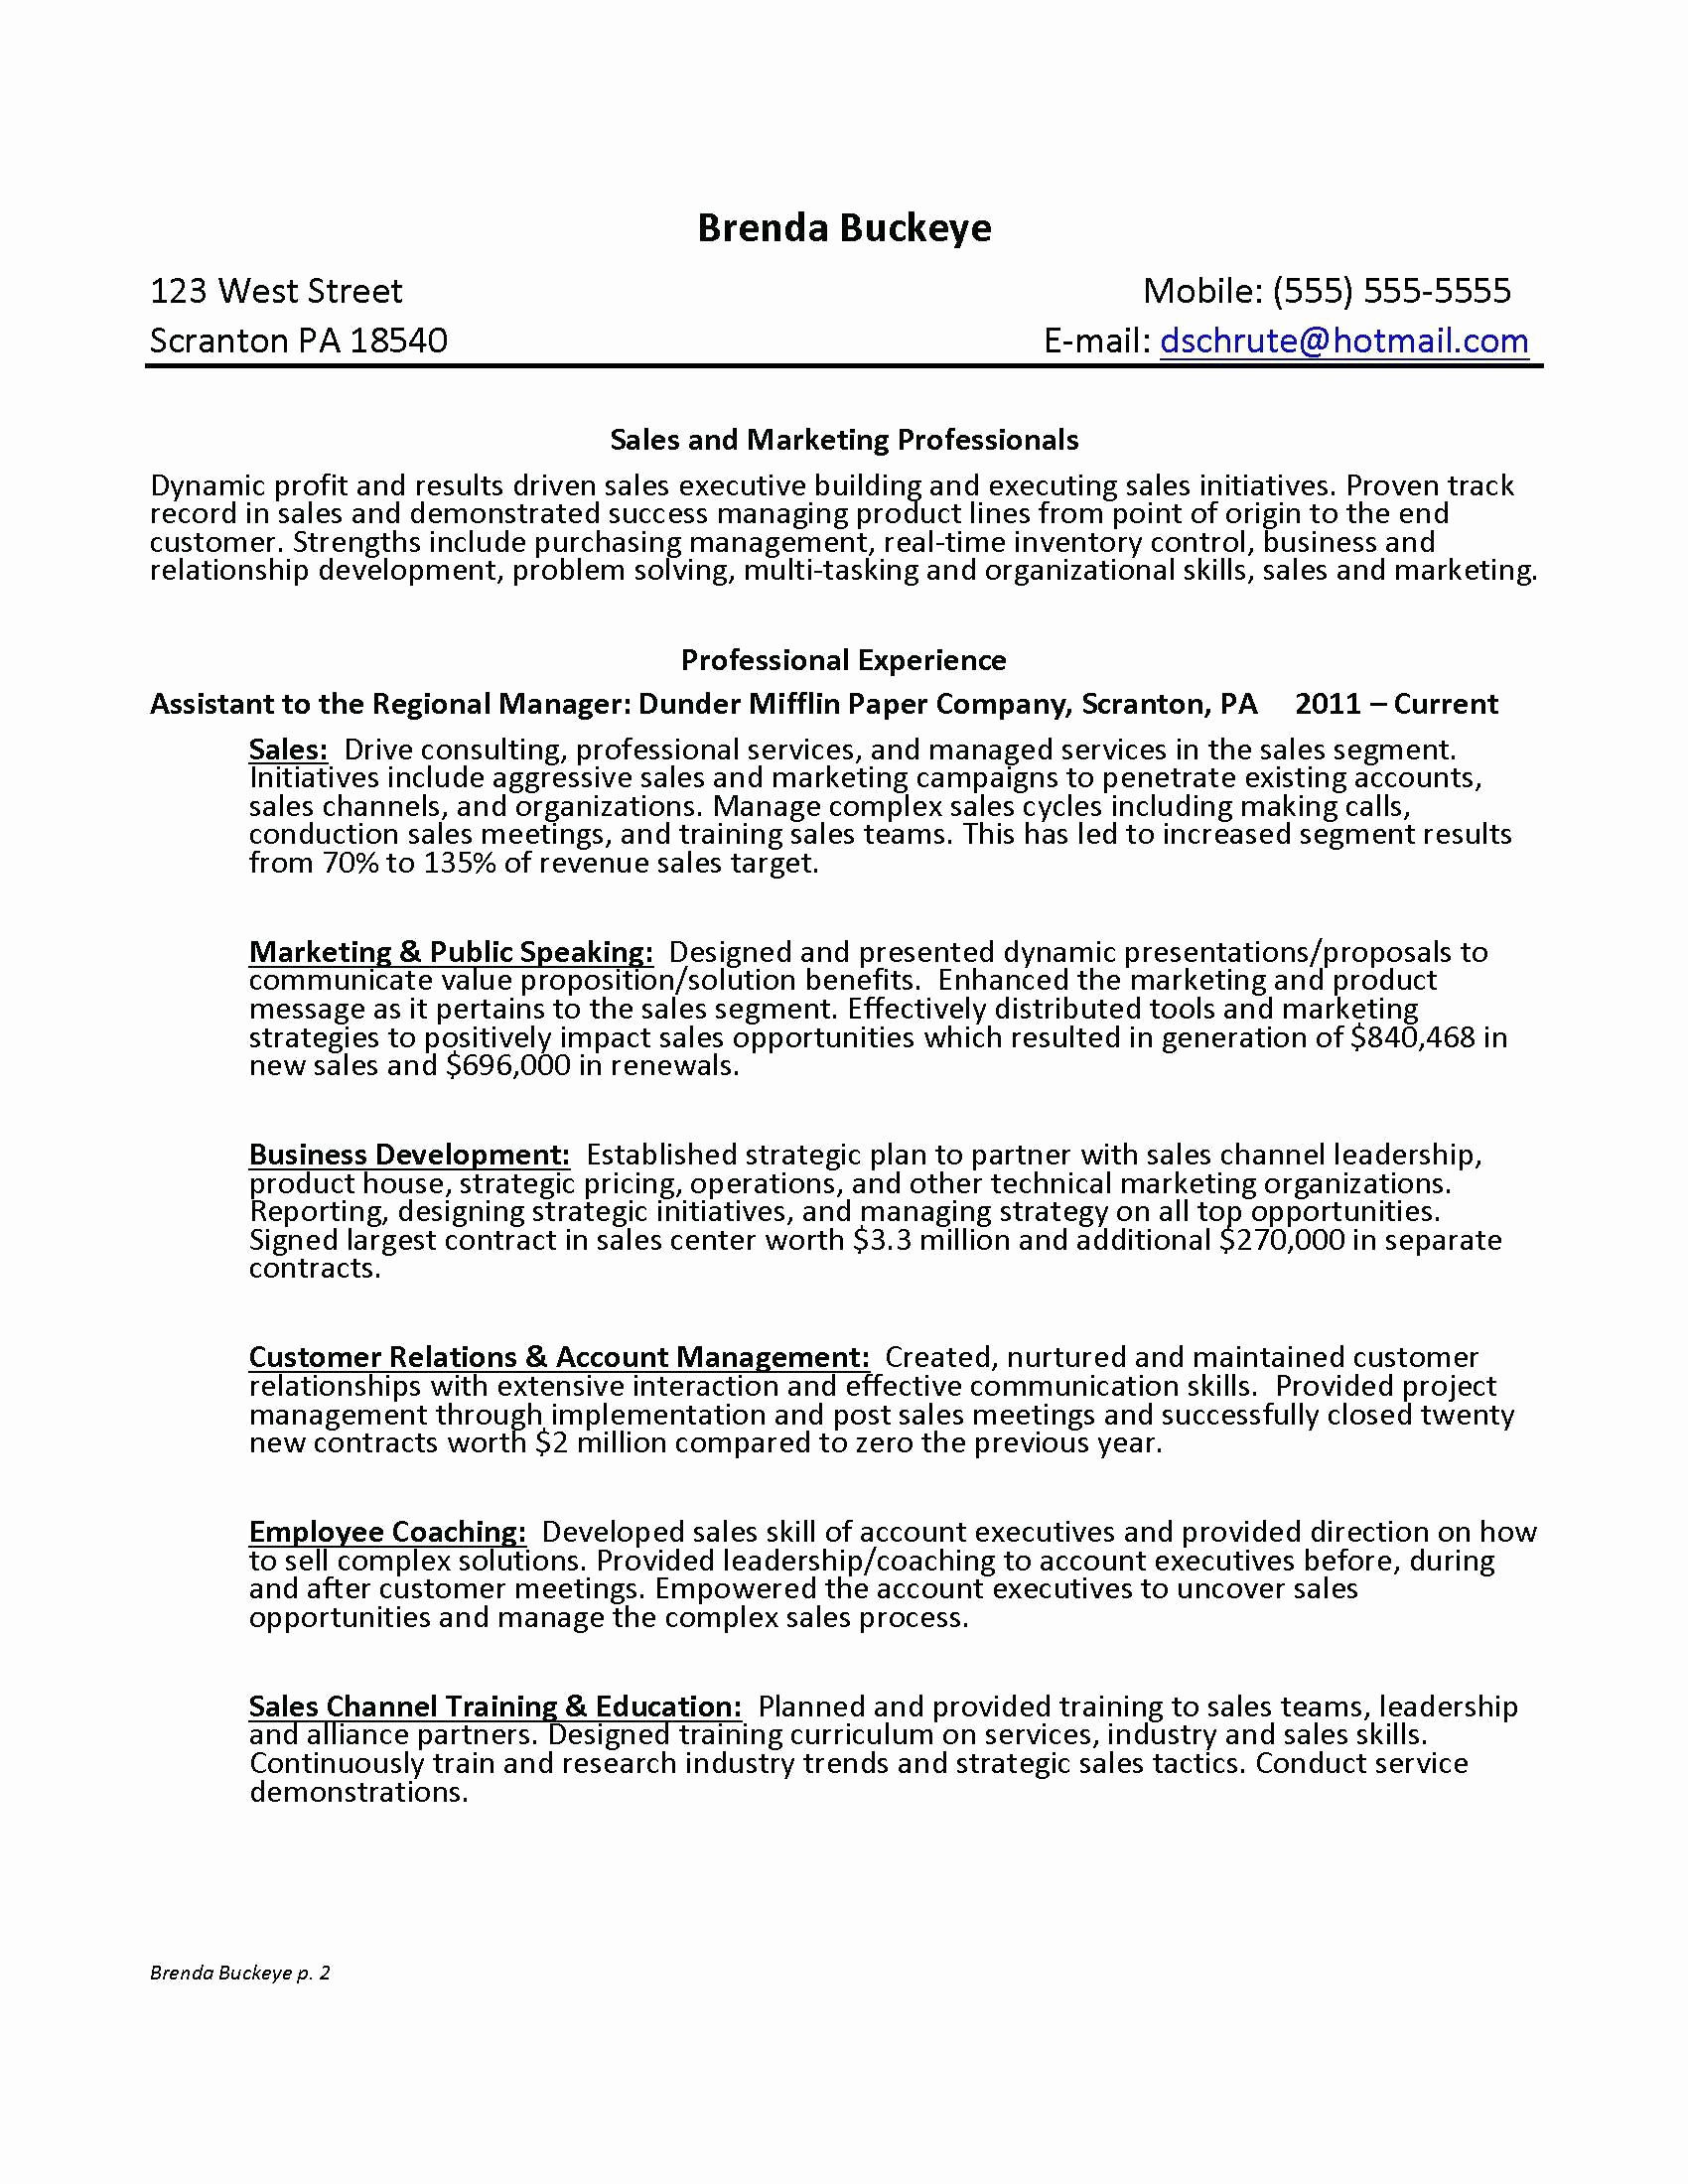 Combined Resume and Cover Letter Lovely these Cover Letter Examples Mon topics Such as Expense